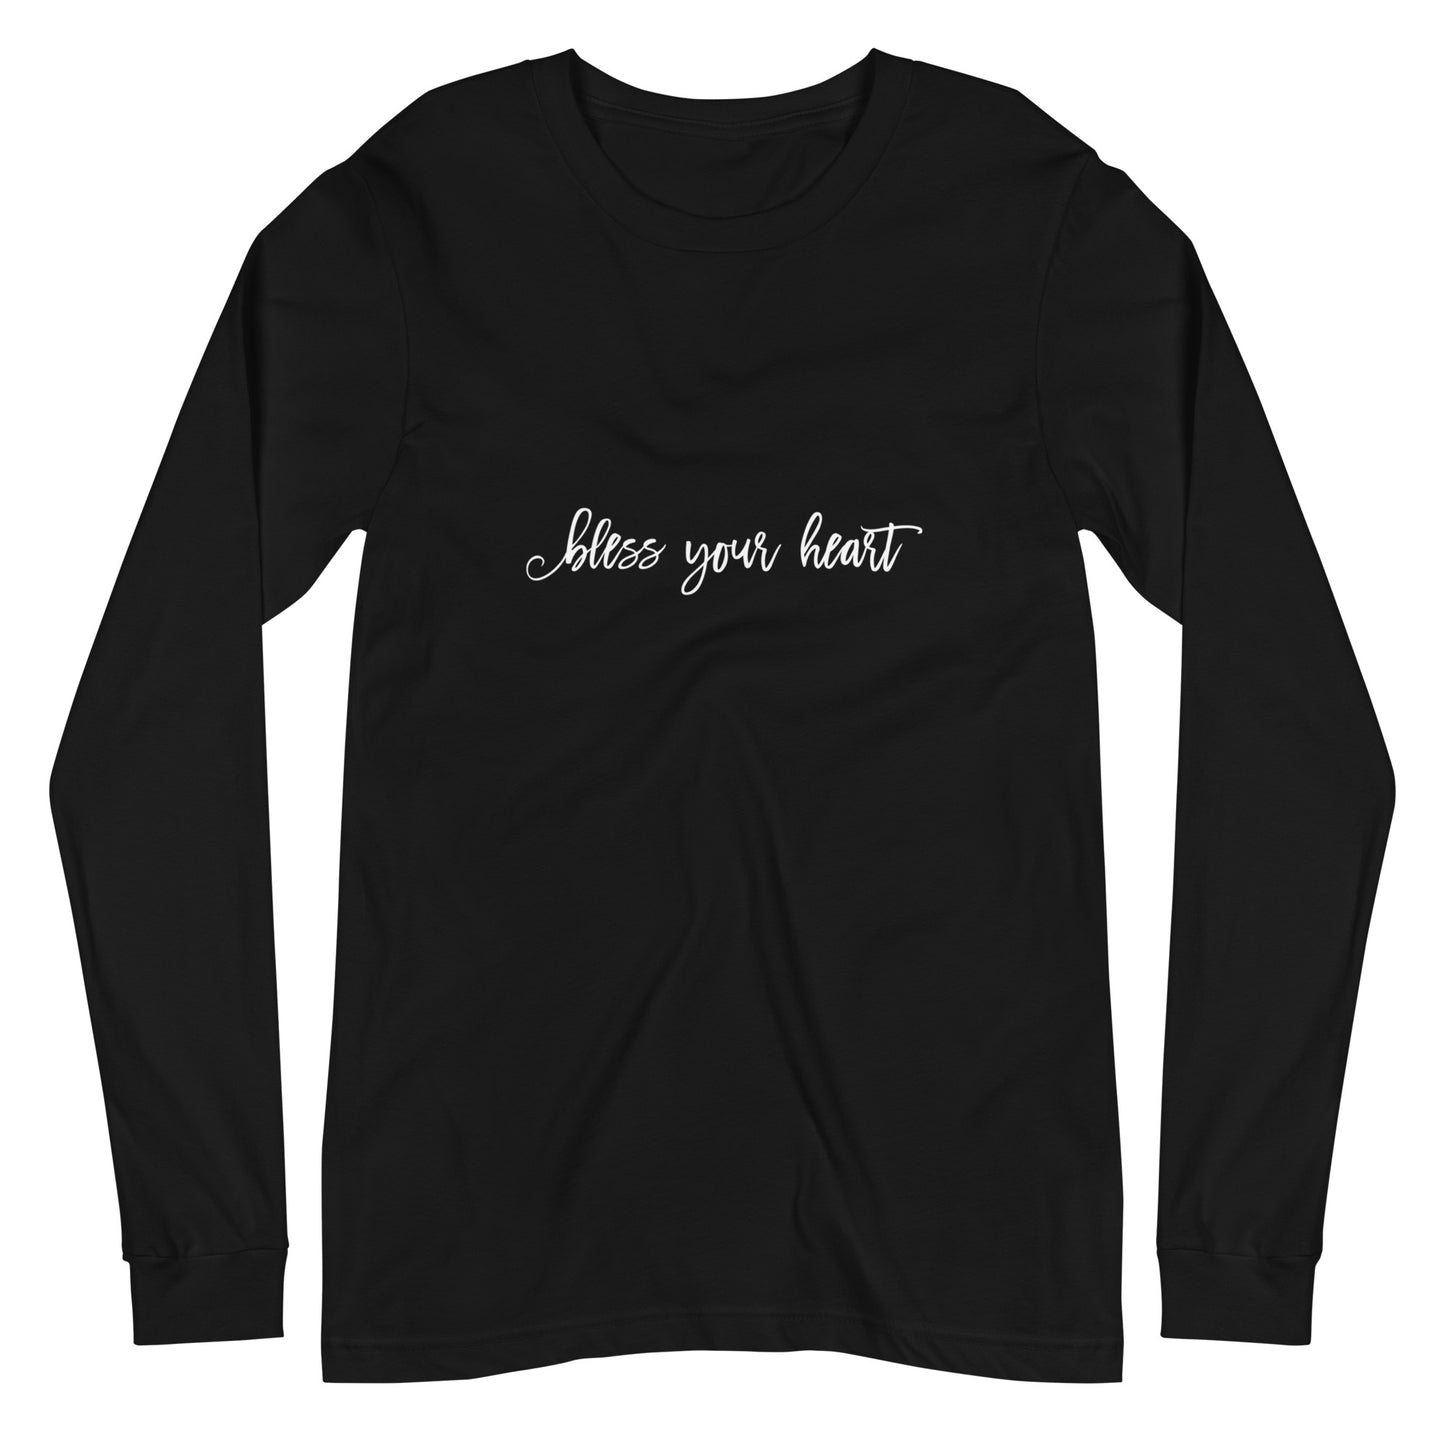 Black long-sleeve t-shirt with white graphic in an excessively twee font: "bless your heart"